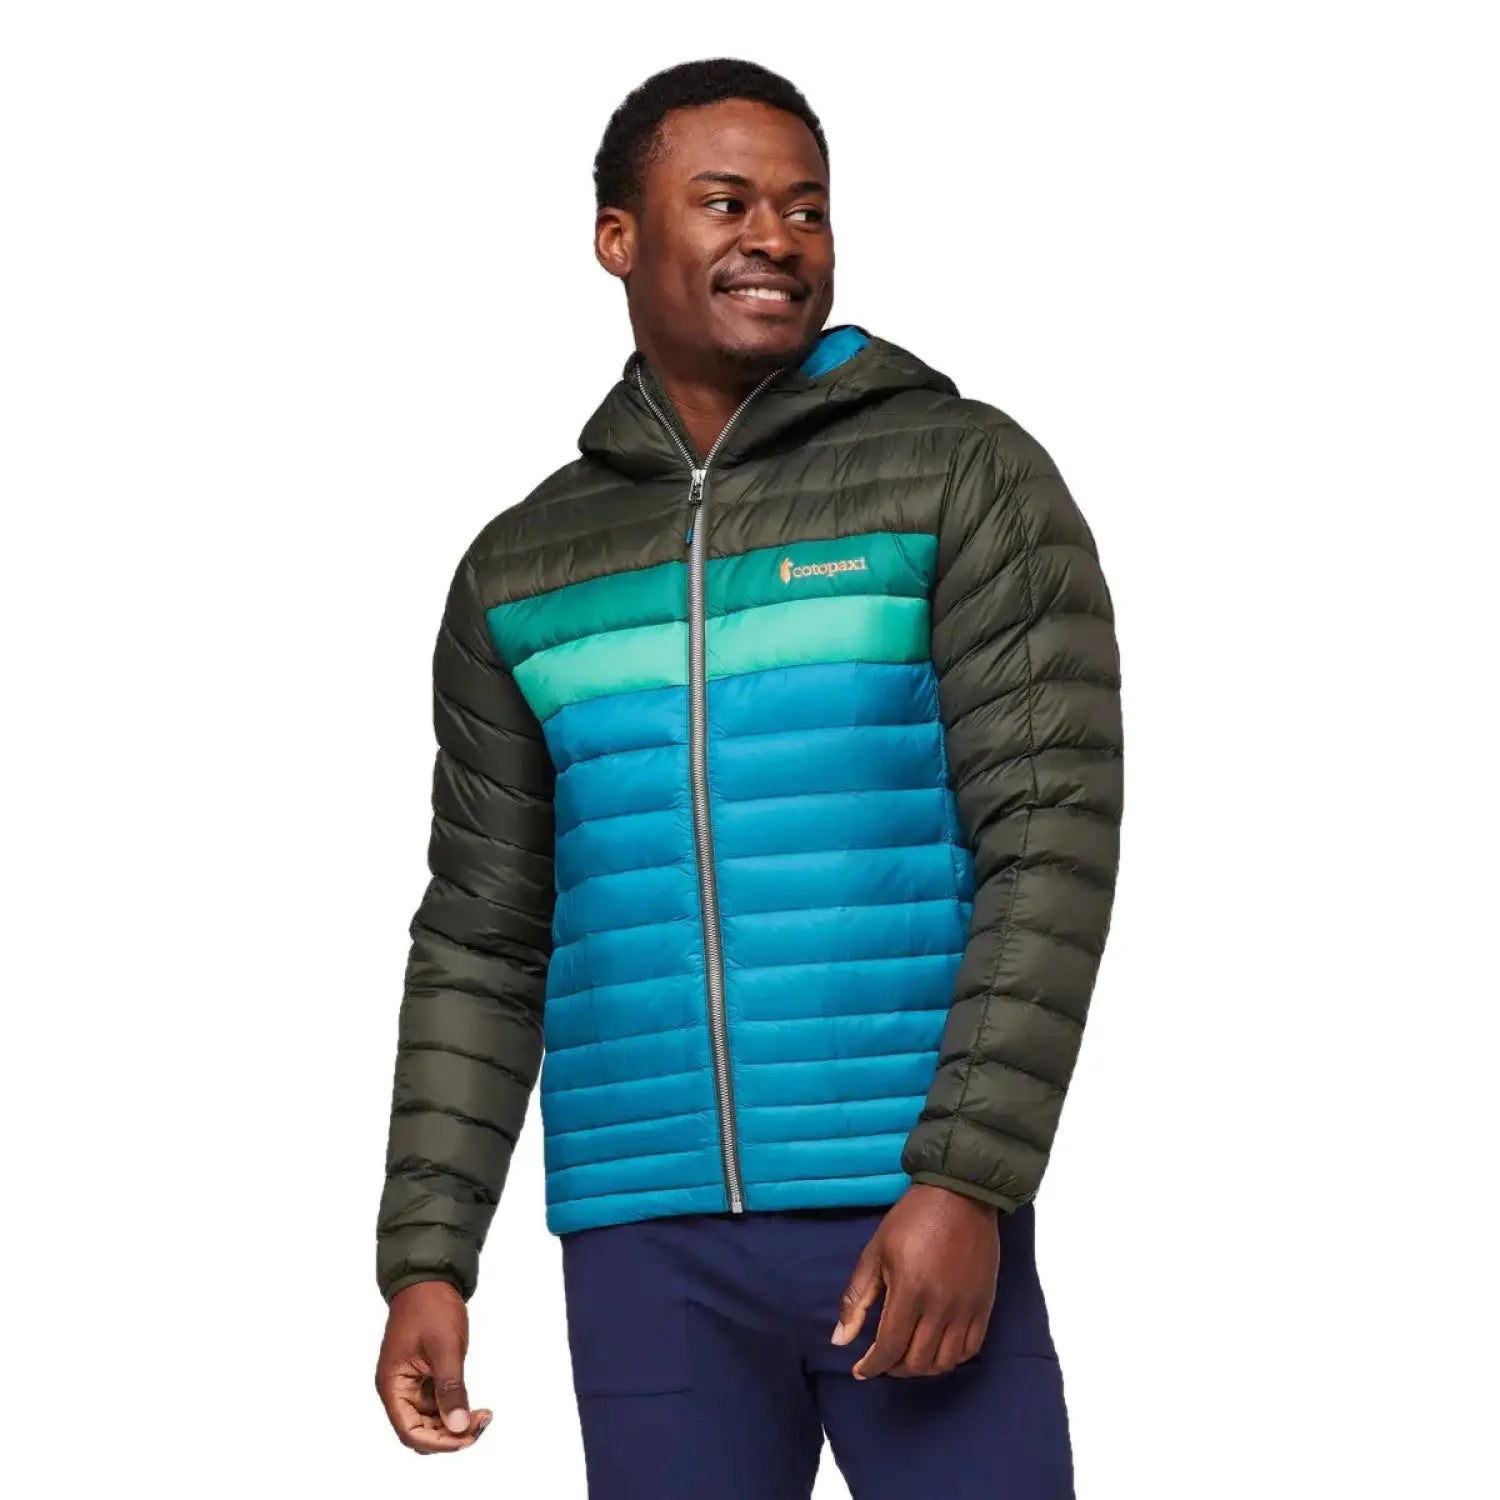 Cotopaxi M's Fuego Hooded Down Jacket, Woods Gulf, front view on model